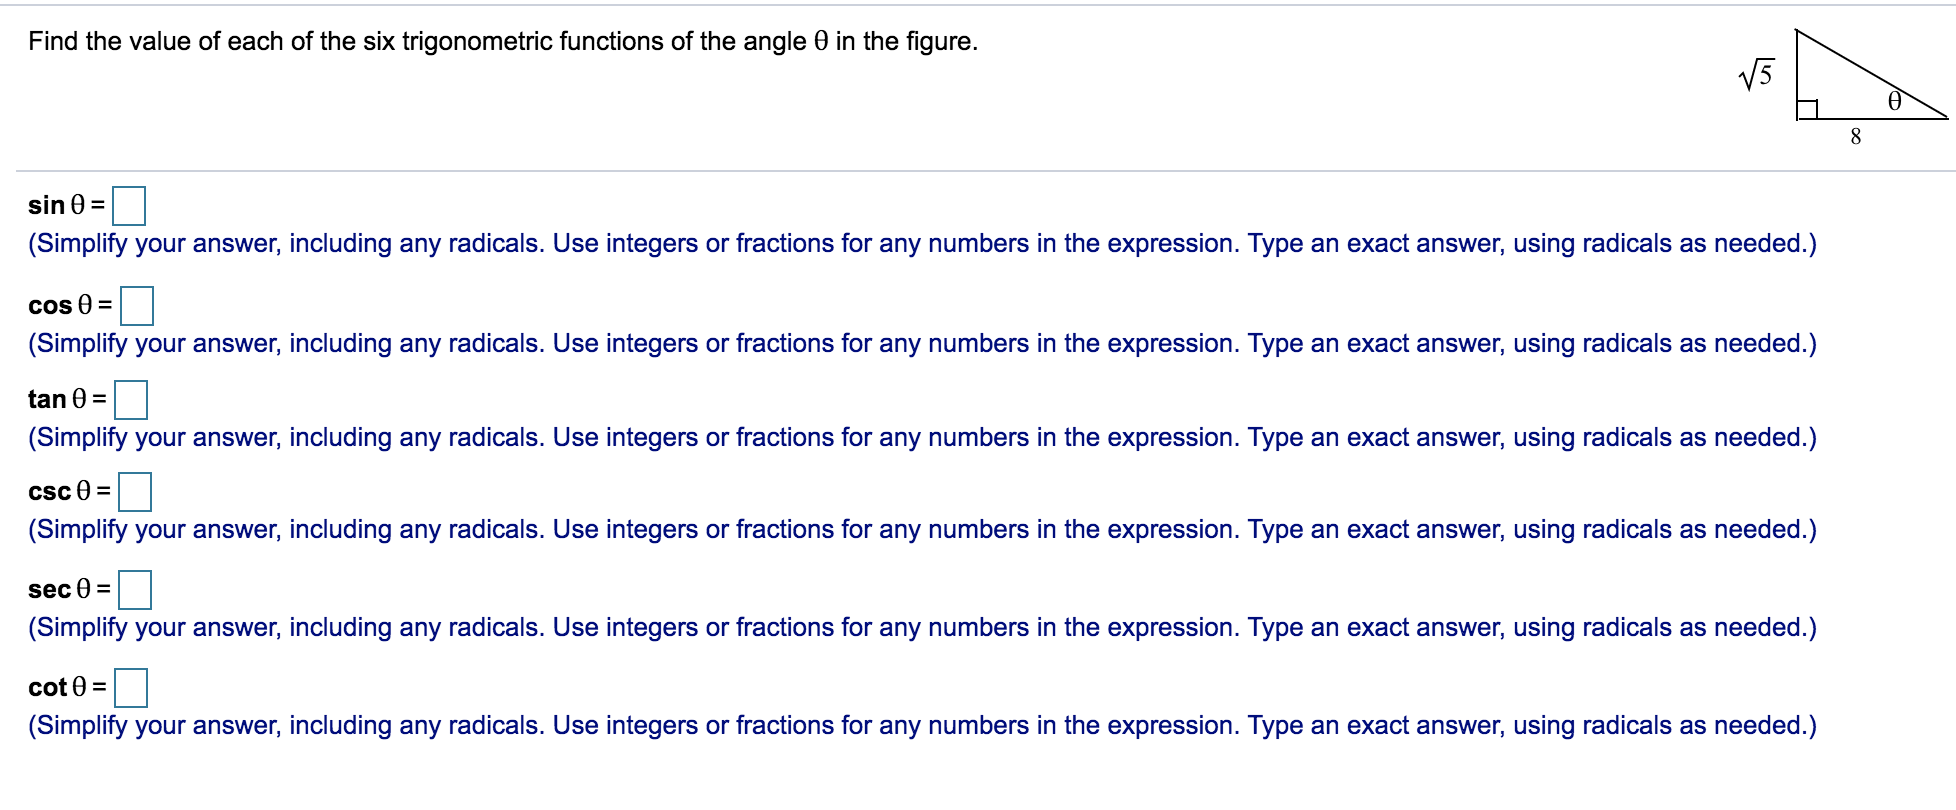 Find the value of each of the six trigonometric functions of the angle 0 in the figure.
V5
sin 0 =
(Simplify your answer, including any radicals. Use integers or fractions for any numbers in the expression. Type an exact answer, using radicals as needed.)
Cos 0 =
(Simplify your answer, including any radicals. Use integers or fractions for any numbers in the expression. Type an exact answer, using radicals as needed.)
tan 0 =
(Simplify your answer, including any radicals. Use integers or fractions for any numbers in the expression. Type an exact answer, using radicals as needed.)
Csc e =
(Simplify your answer, including any radicals. Use integers or fractions for any numbers in the expression. Type an exact answer, using radicals as needed.)
sec 0 =
(Simplify your answer, including any radicals. Use integers or fractions for any numbers in the expression. Type an exact answer, using radicals as needed.)
cot 0 =
(Simplify your answer, including any radicals. Use integers or fractions for any numbers in the expression. Type an exact answer, using radicals as needed.)
